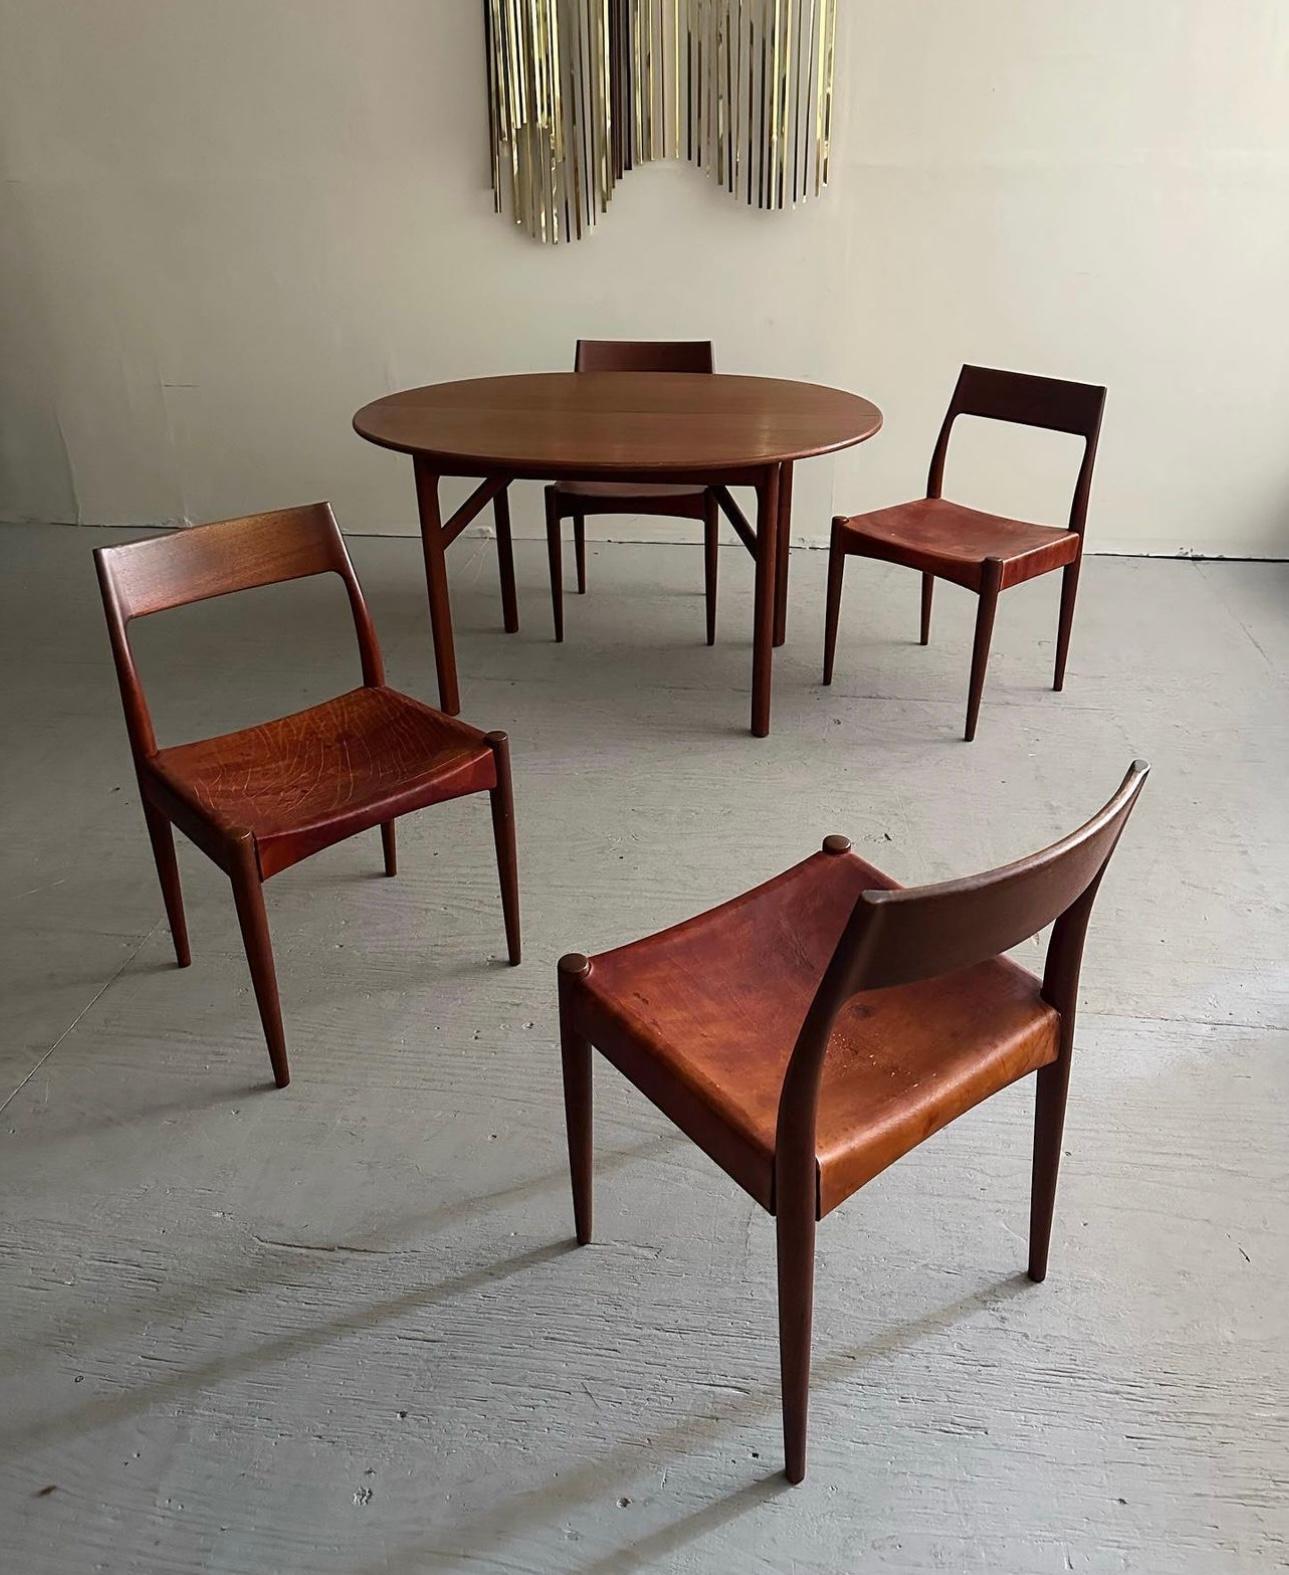 Danish Modern Dining Set Designed By Arne Hovmand-Olsen For Mogens Kold Møbelfabrik, Circa 1950s. This stunning dining set is comprised entirely of solid teak construction. Features six sculptural “Model 175” dining chairs with thick cognac colored